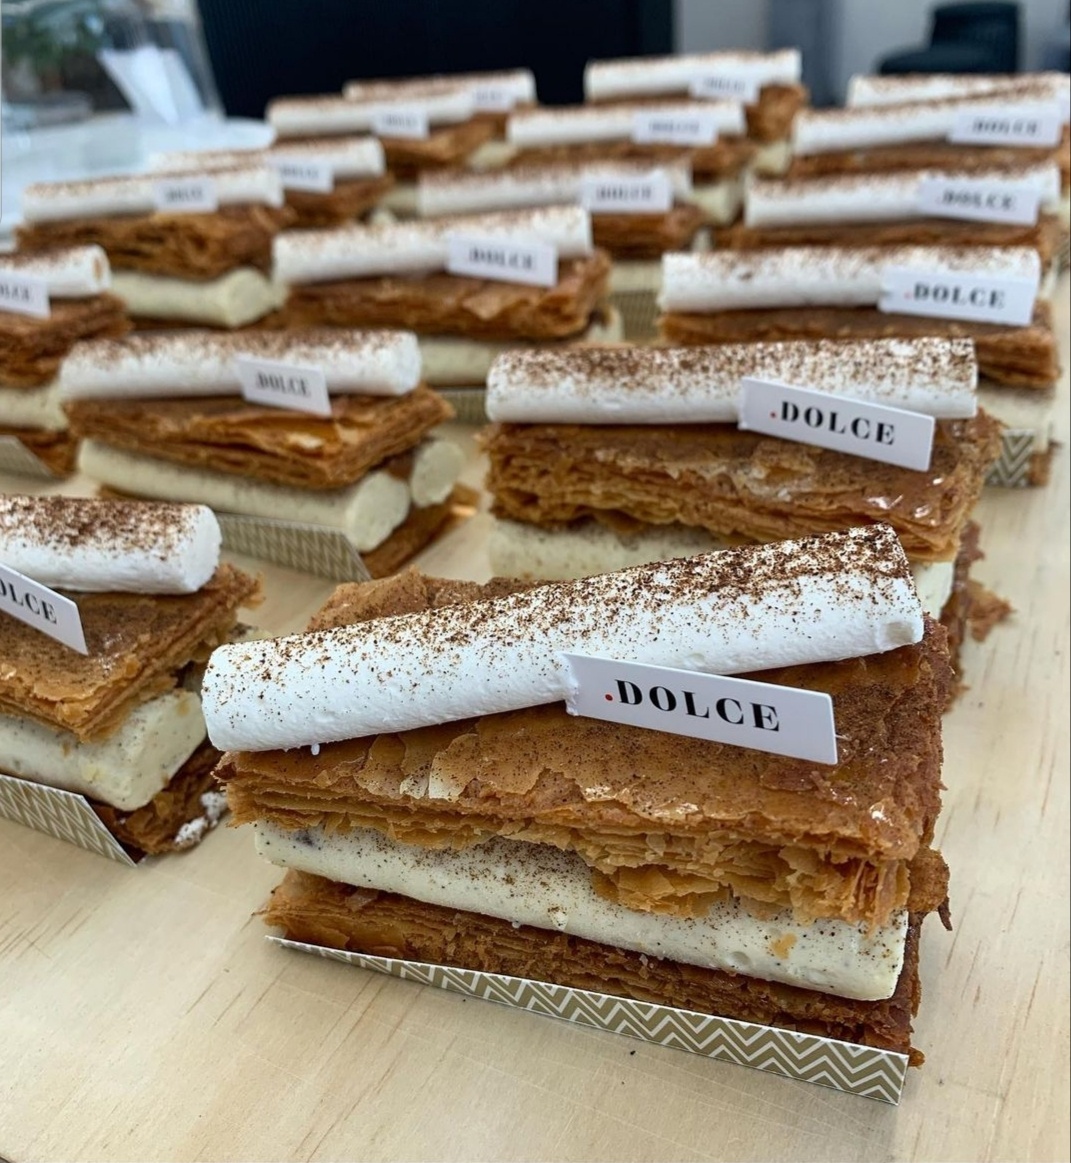 Punto Dolce’s millefoglie, called diplomatica, features two stacks of impossibly thin layers of puff pastry that swaddle a lush filling of salted caramel and vanilla-rich cream. (Photo credit: Soojoo Kim)